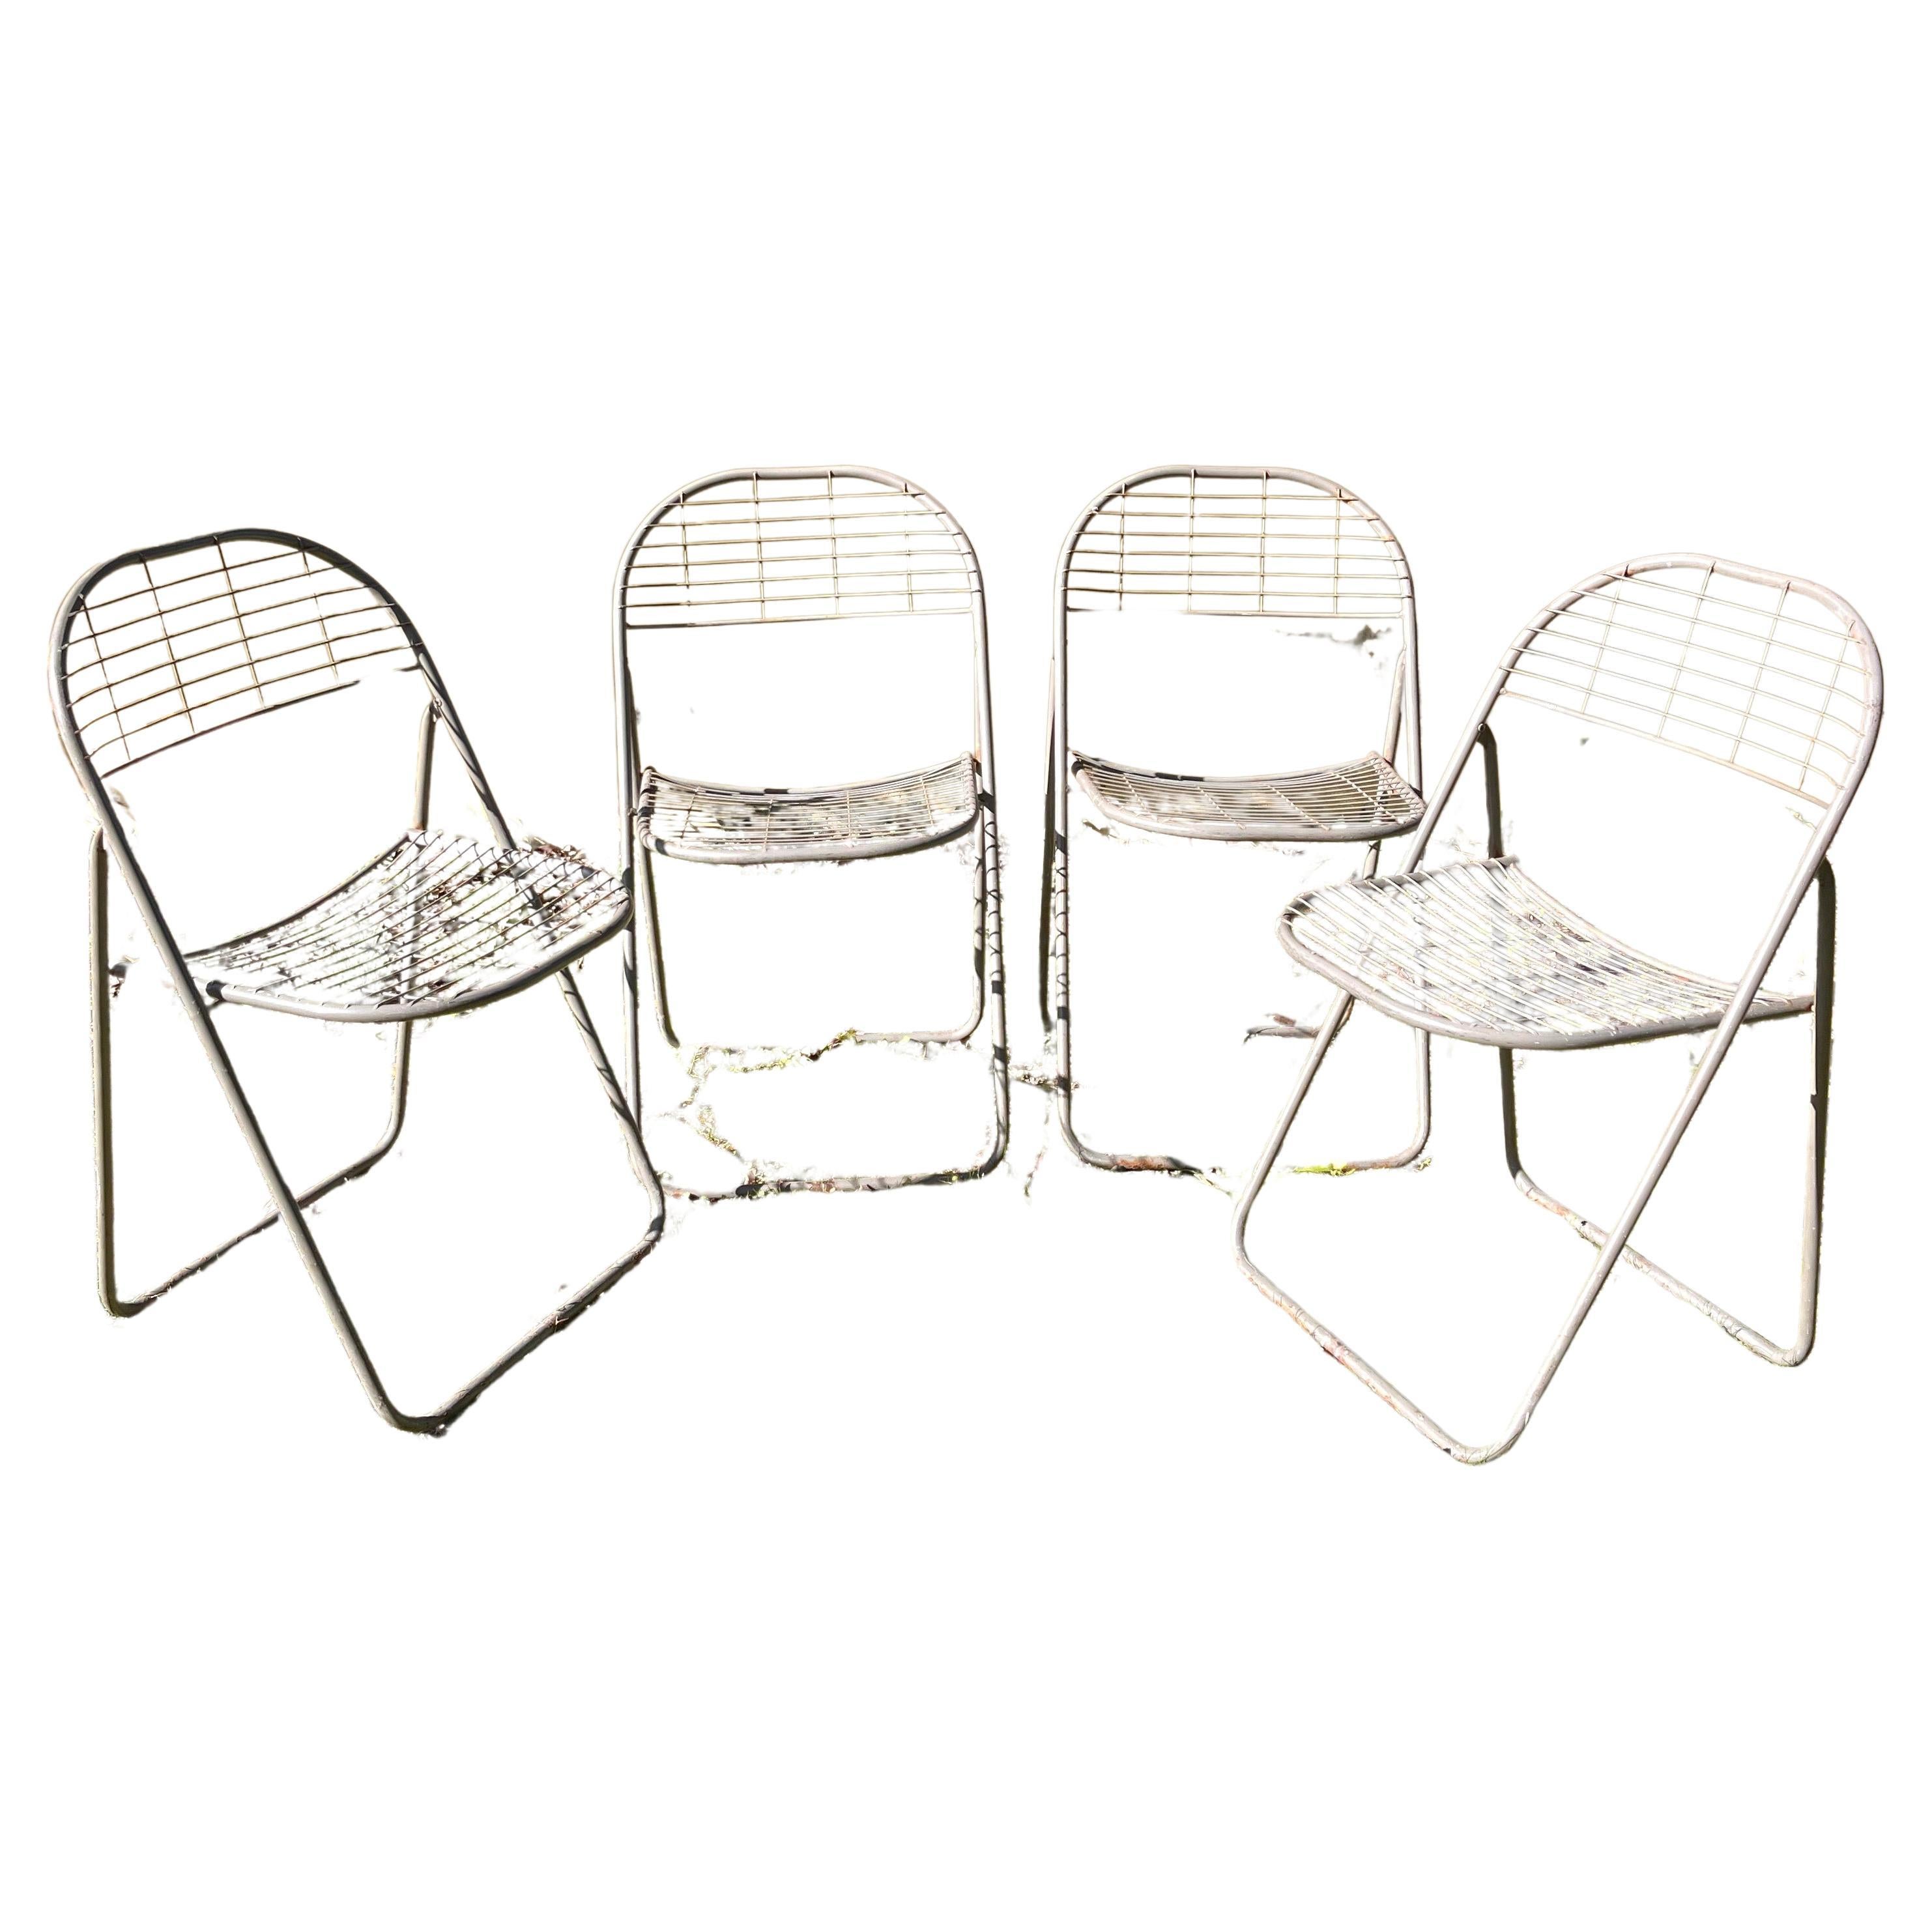 Ted Net folding garden chairs by Niels Gammelgaard for Ikea, 1970s For Sale